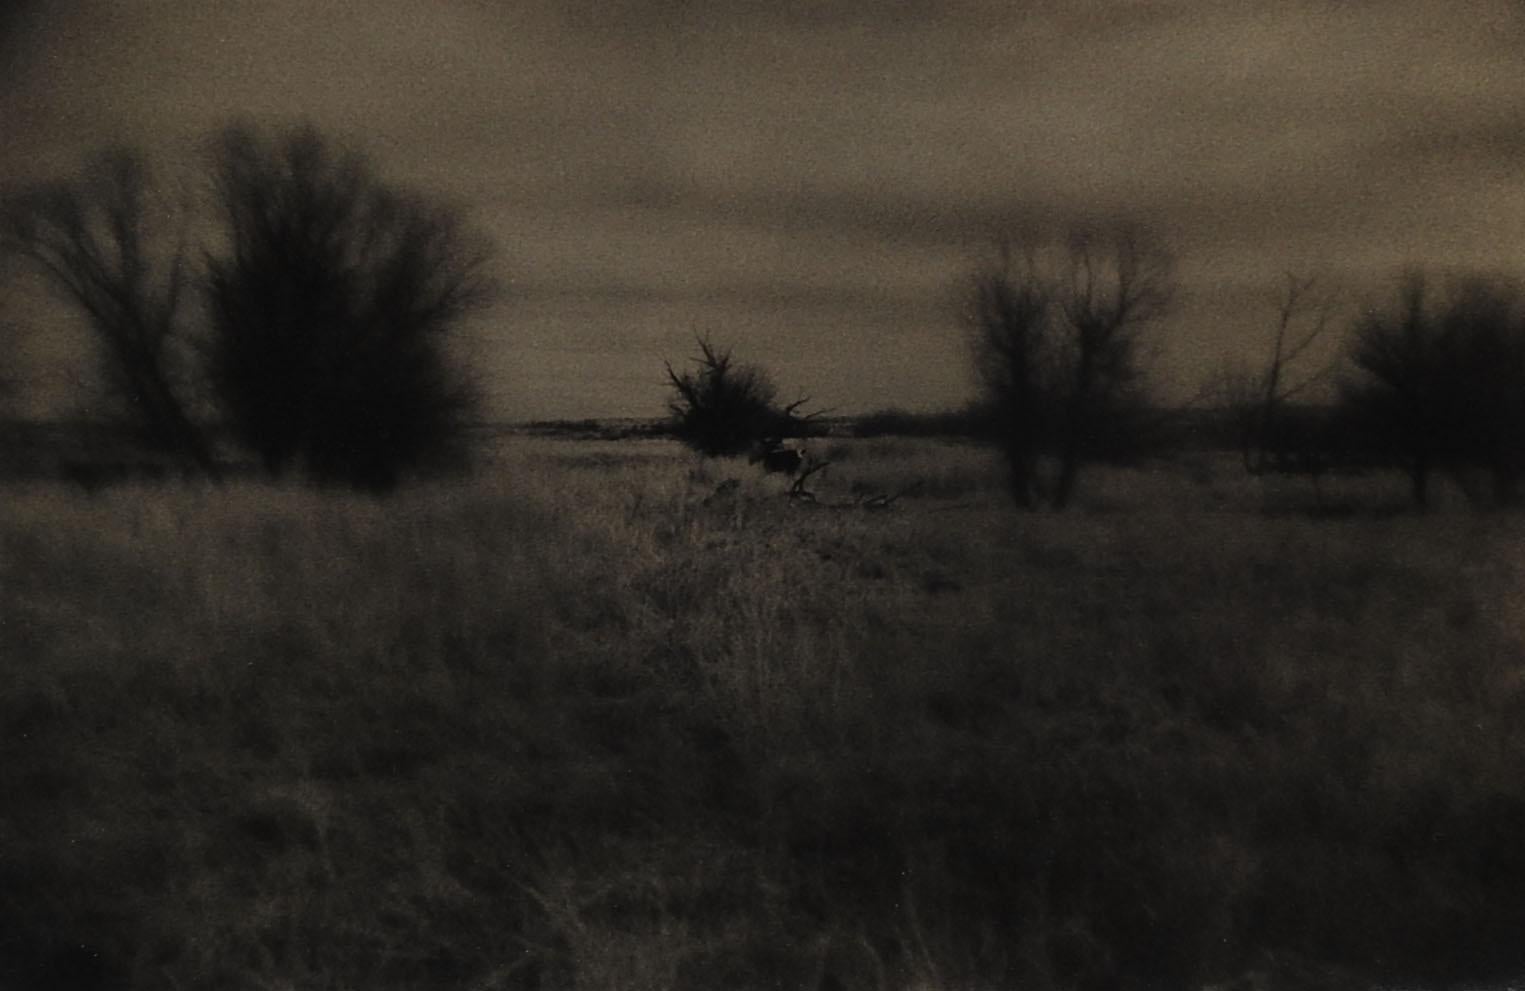 Rustic 1990s Sepia Toned Moody Eric Weller Prairie Landscape Photograph For Sale